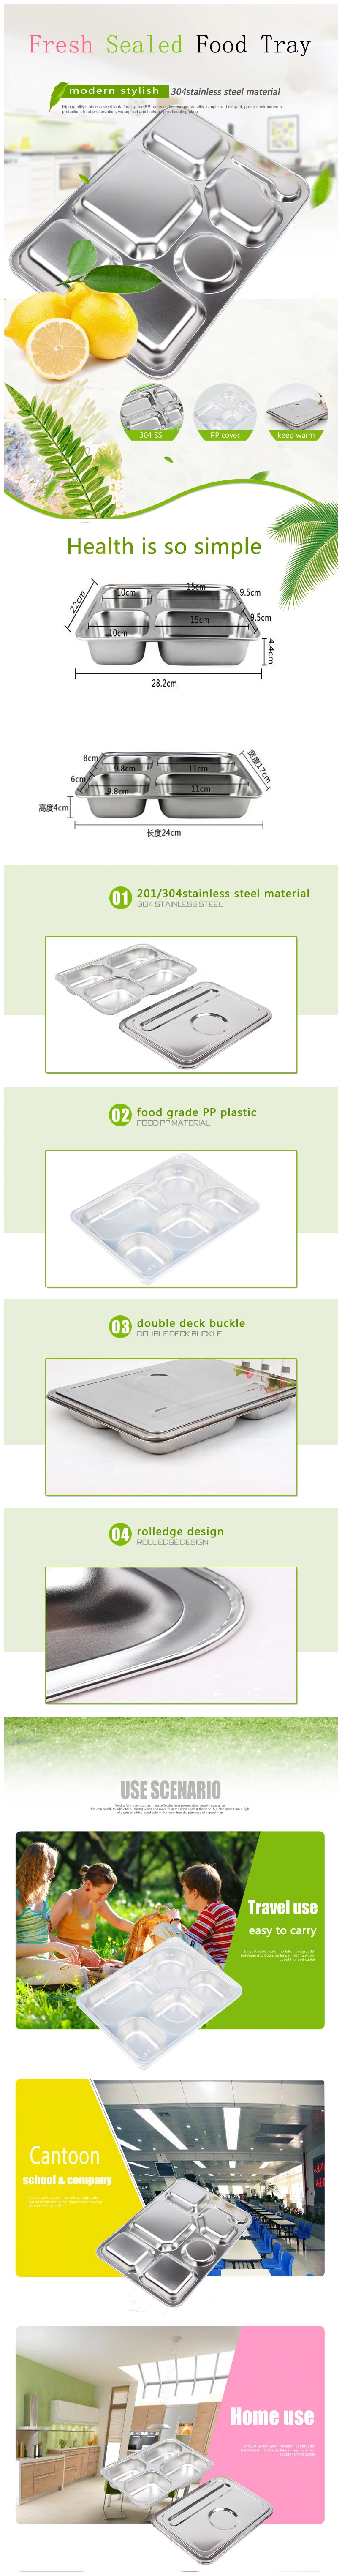 Stainless Steel Kitchenware, High Quality Food Box, Lunch Tray